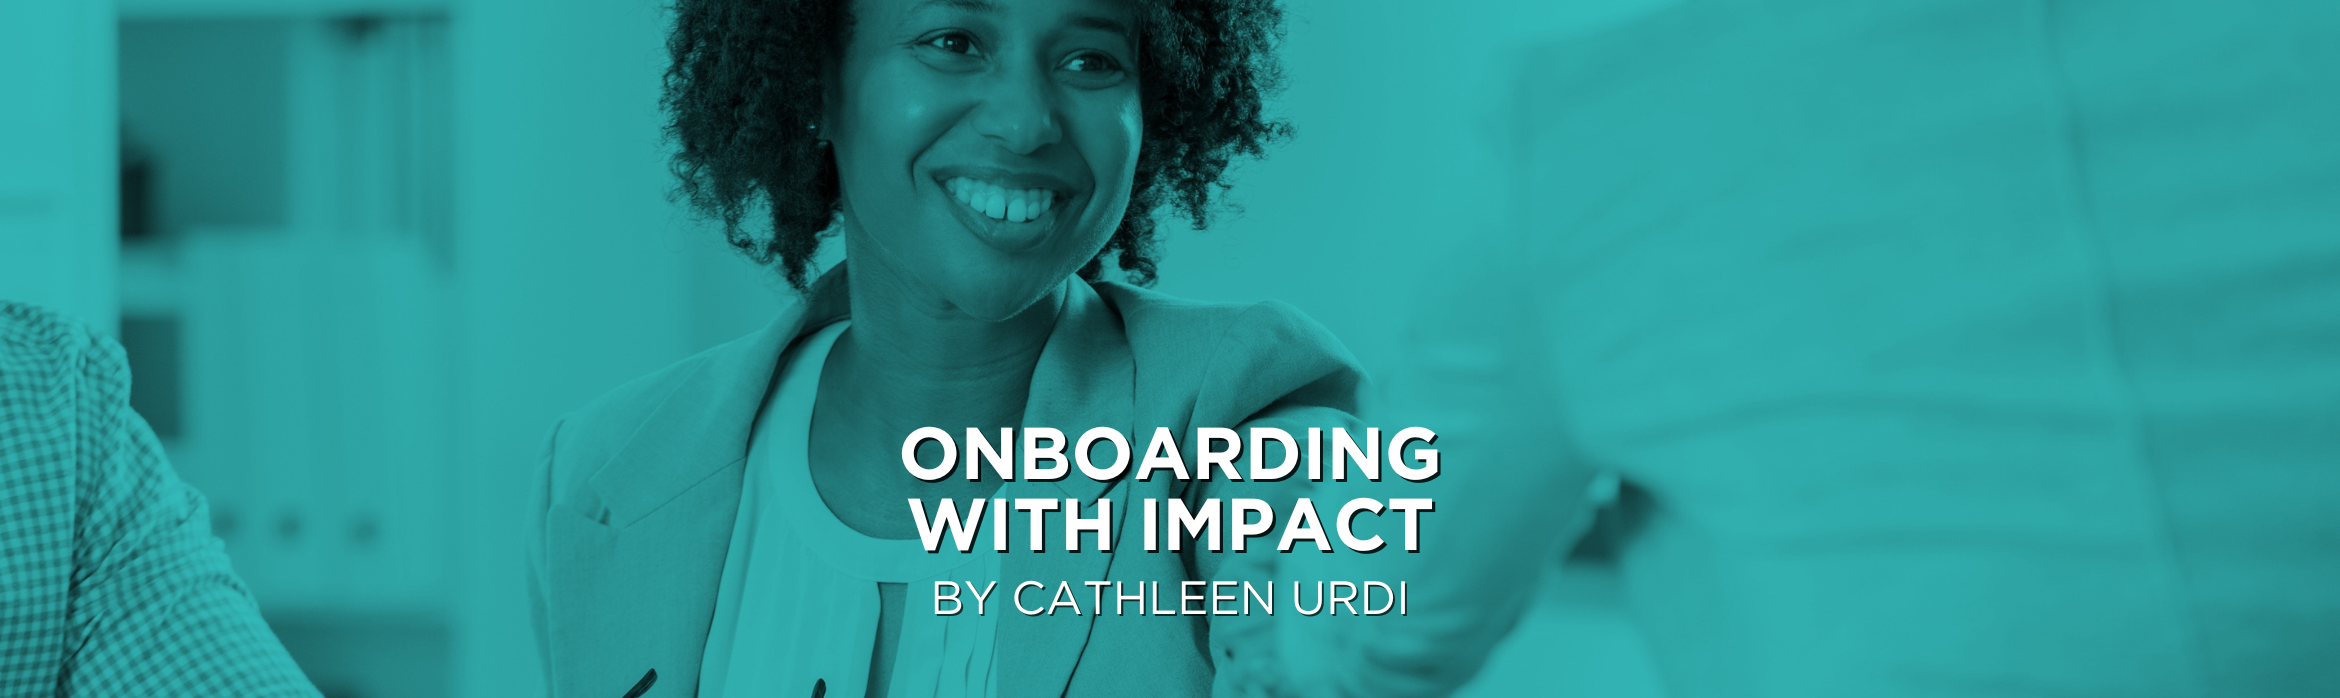 Onboarding with Impact